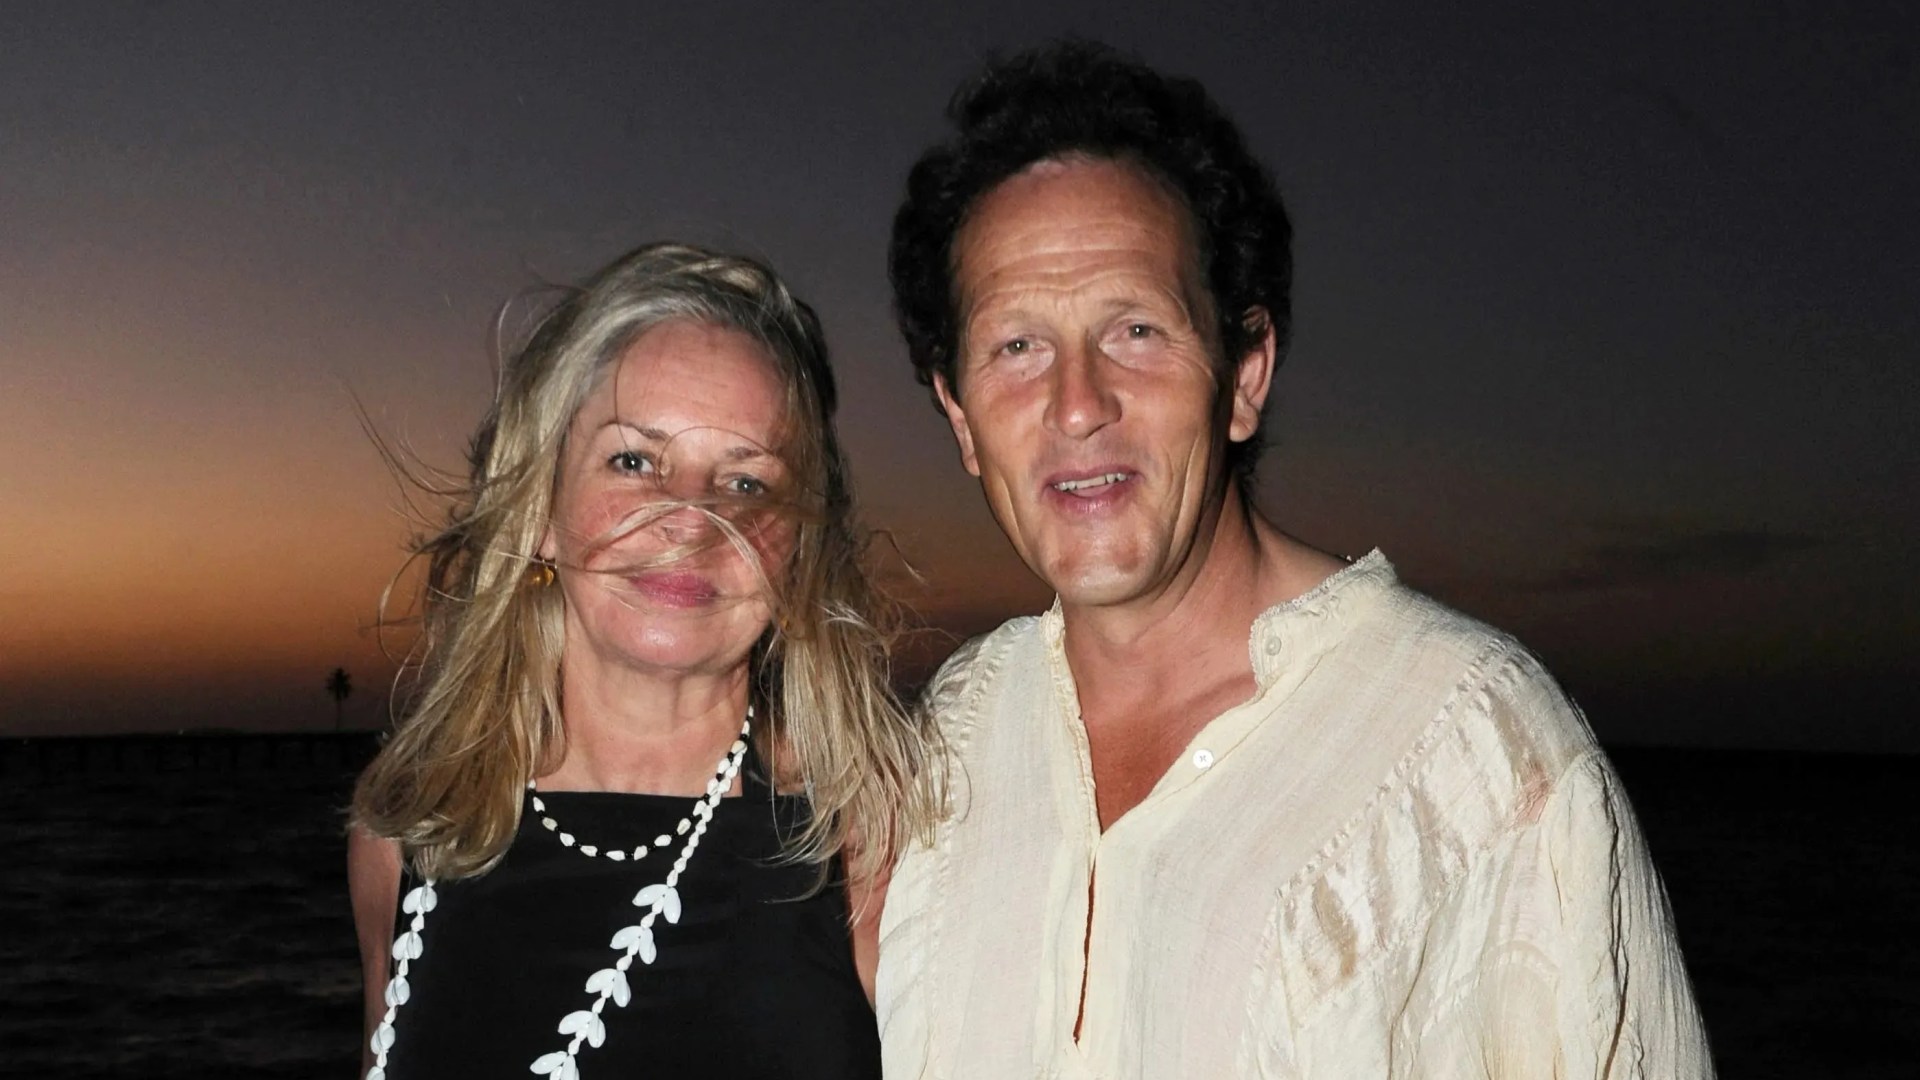 Who is Monty Don’s wife, Sarah Don? [Video]